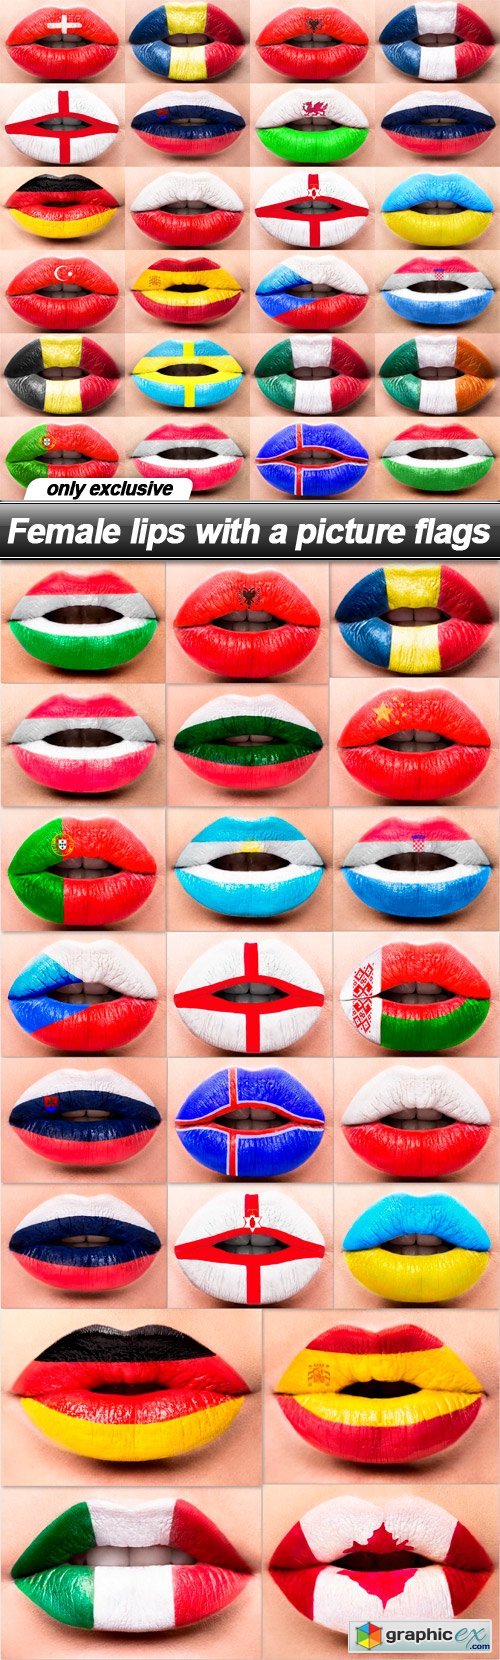 Female lips with a picture flags - 23 UHQ JPEG